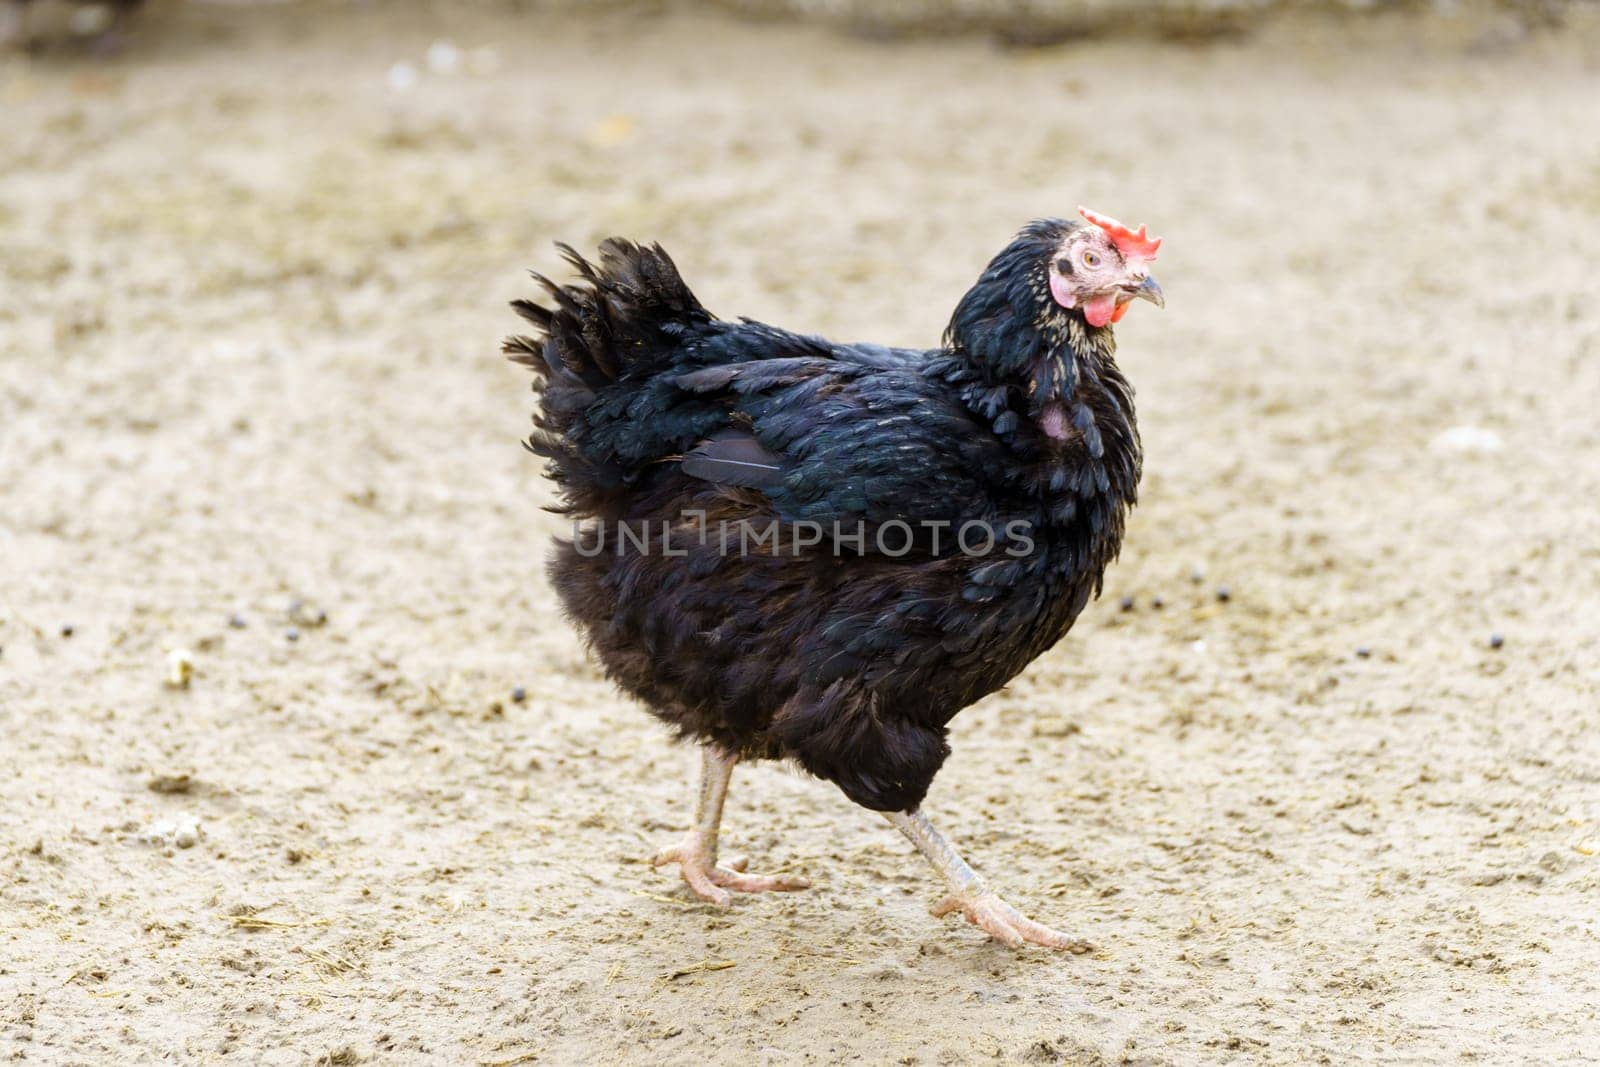 Chicken gracefully moves across a dry dirt field, its feathers shimmering in the sunlight. by darksoul72